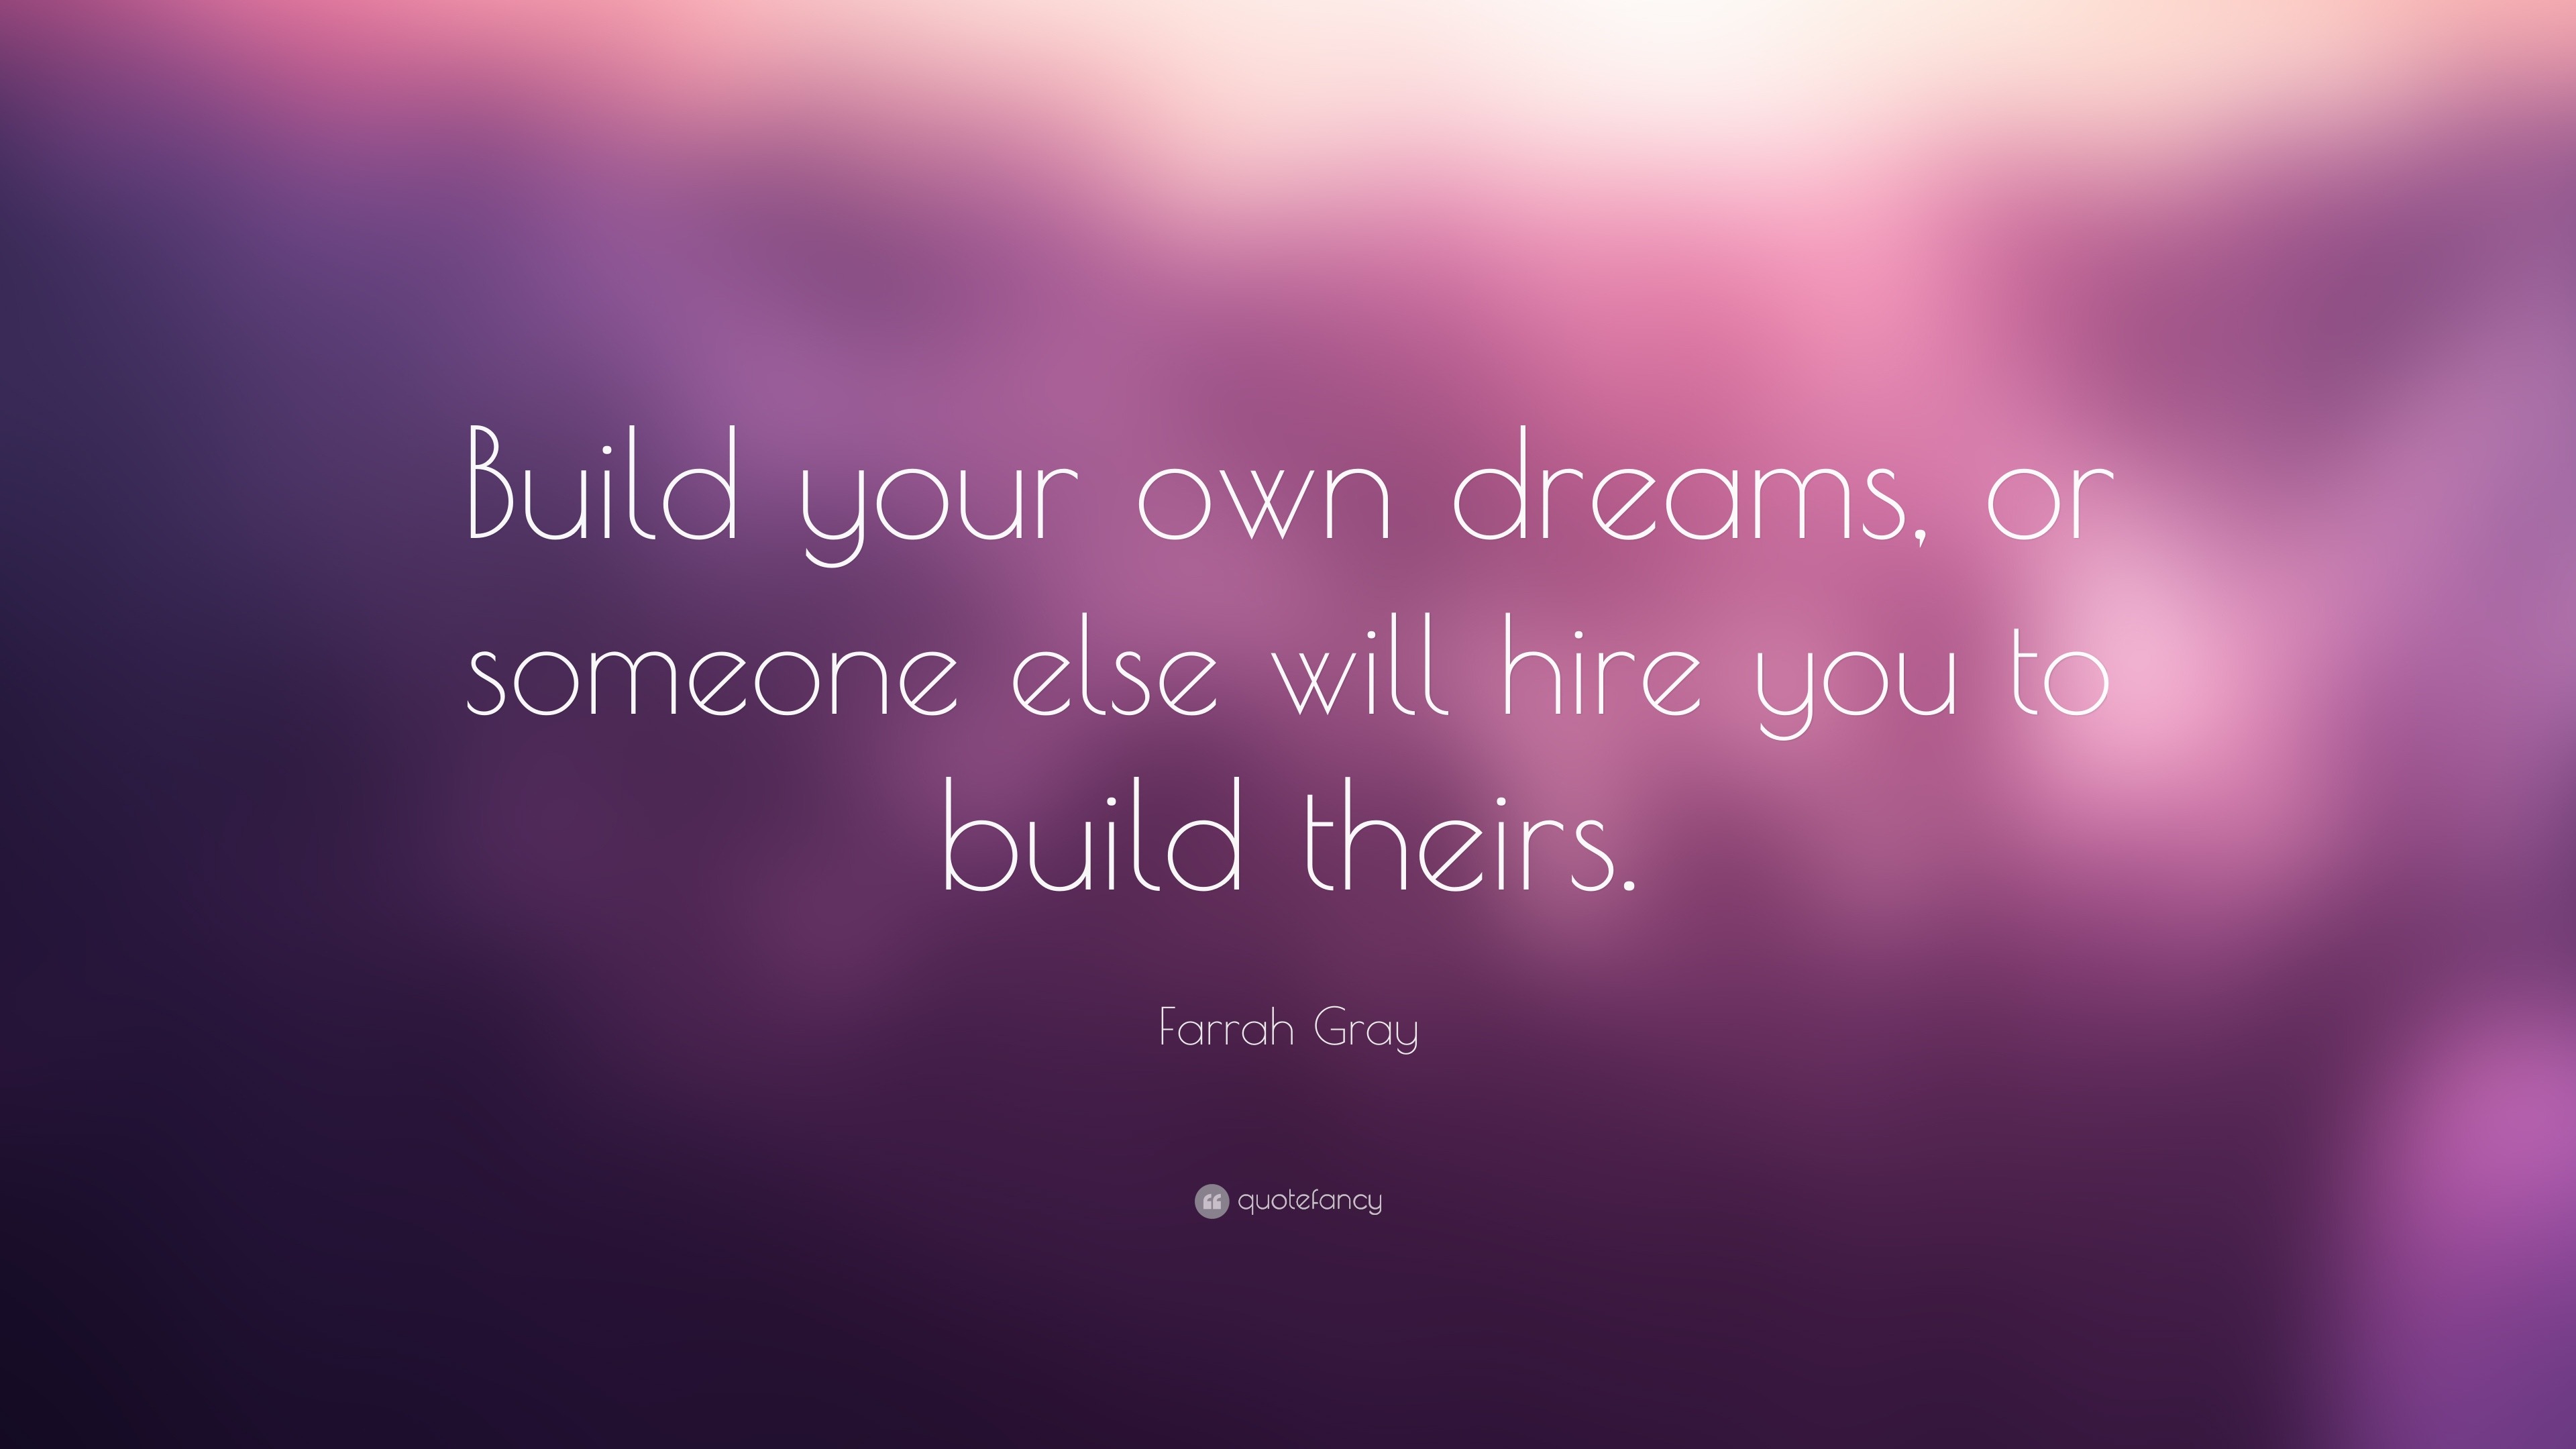 Farrah Gray Quote: "Build your own dreams, or someone else ...